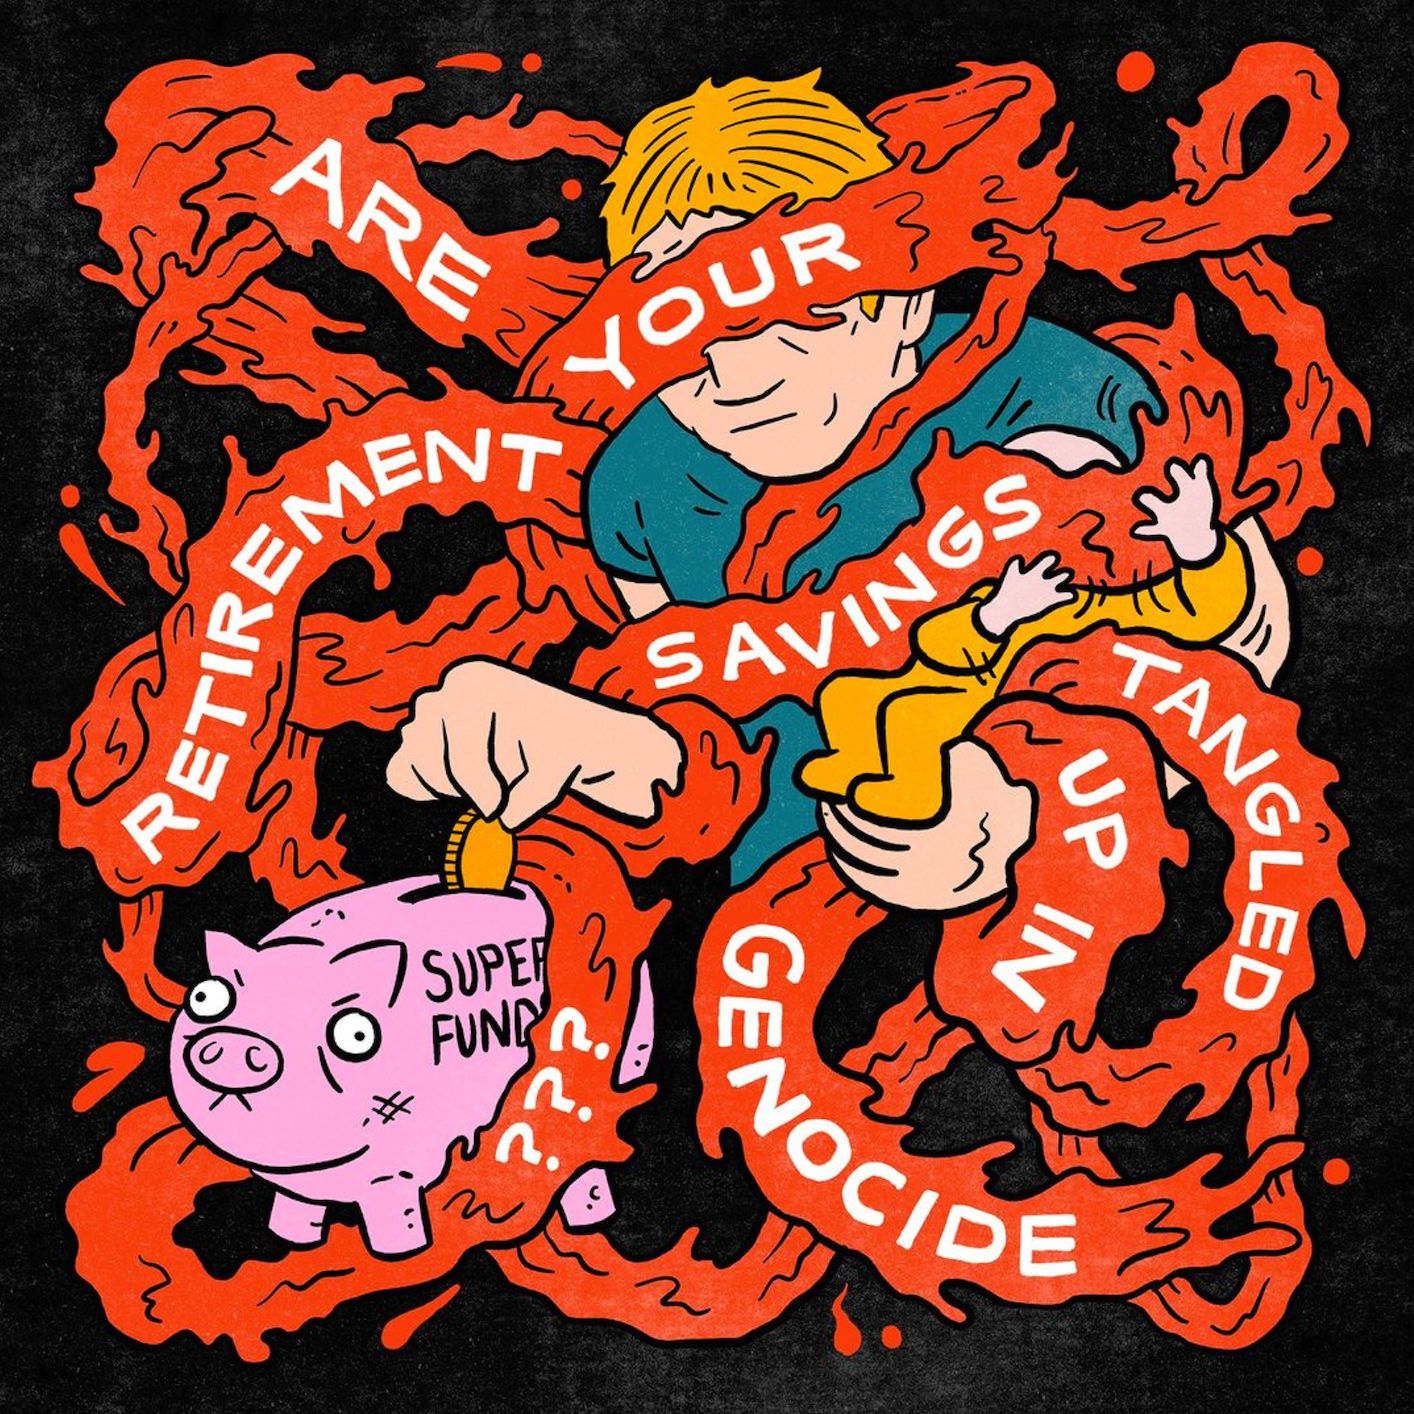 Art by Sam Wallman depicting the text "Are your retirement savings tangled up in genocide?" 